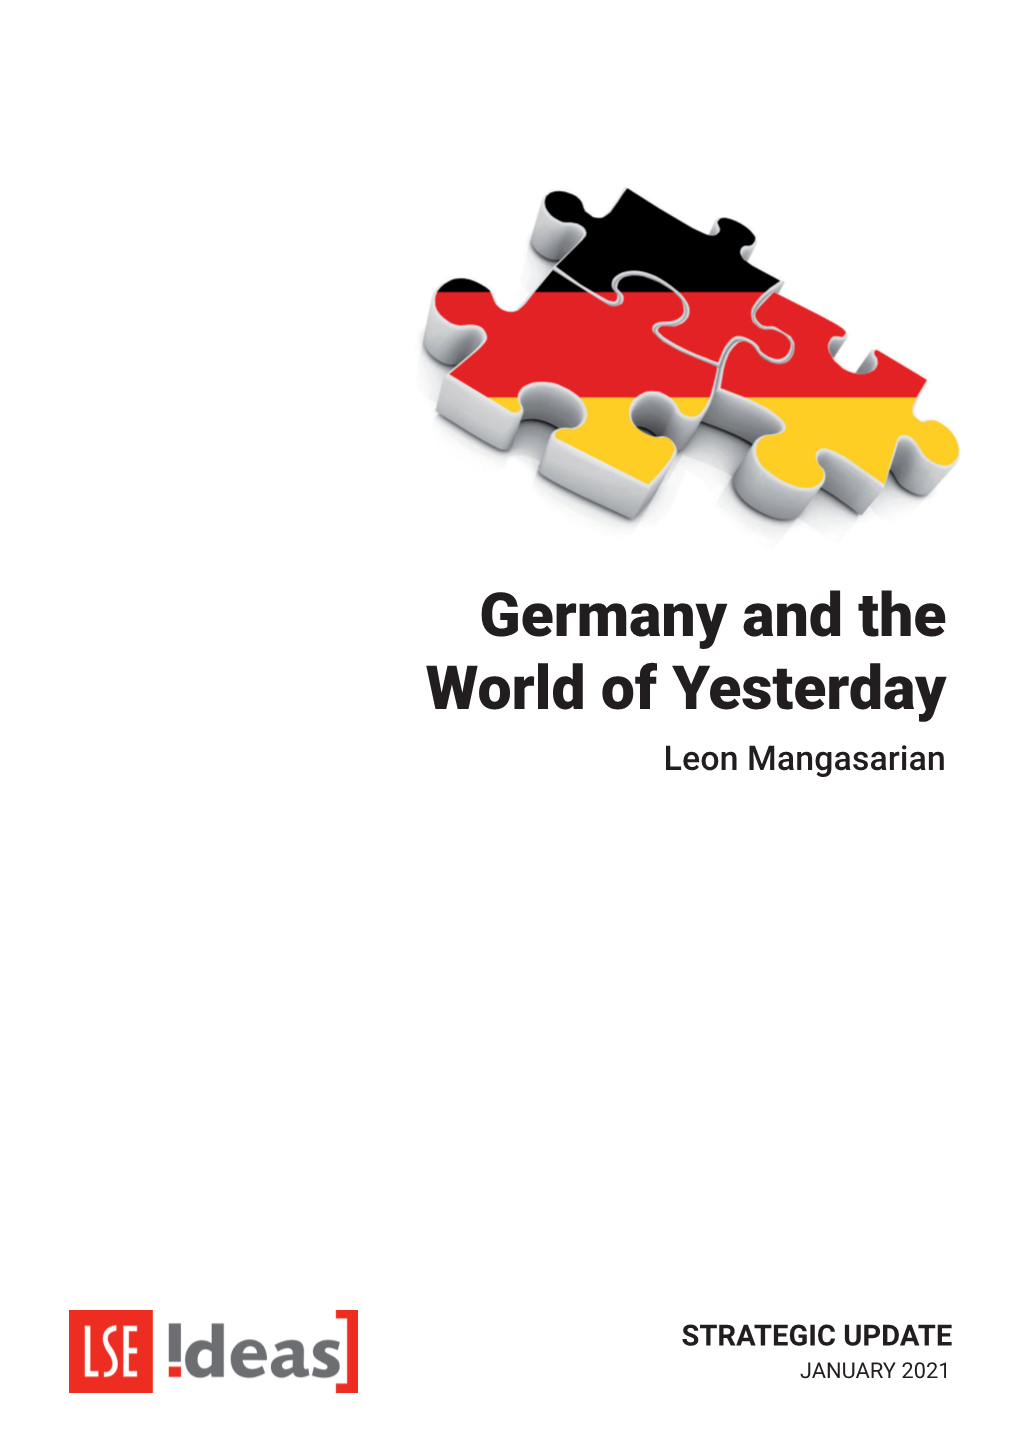 Germany and the World of Yesterday Leon Mangasarian